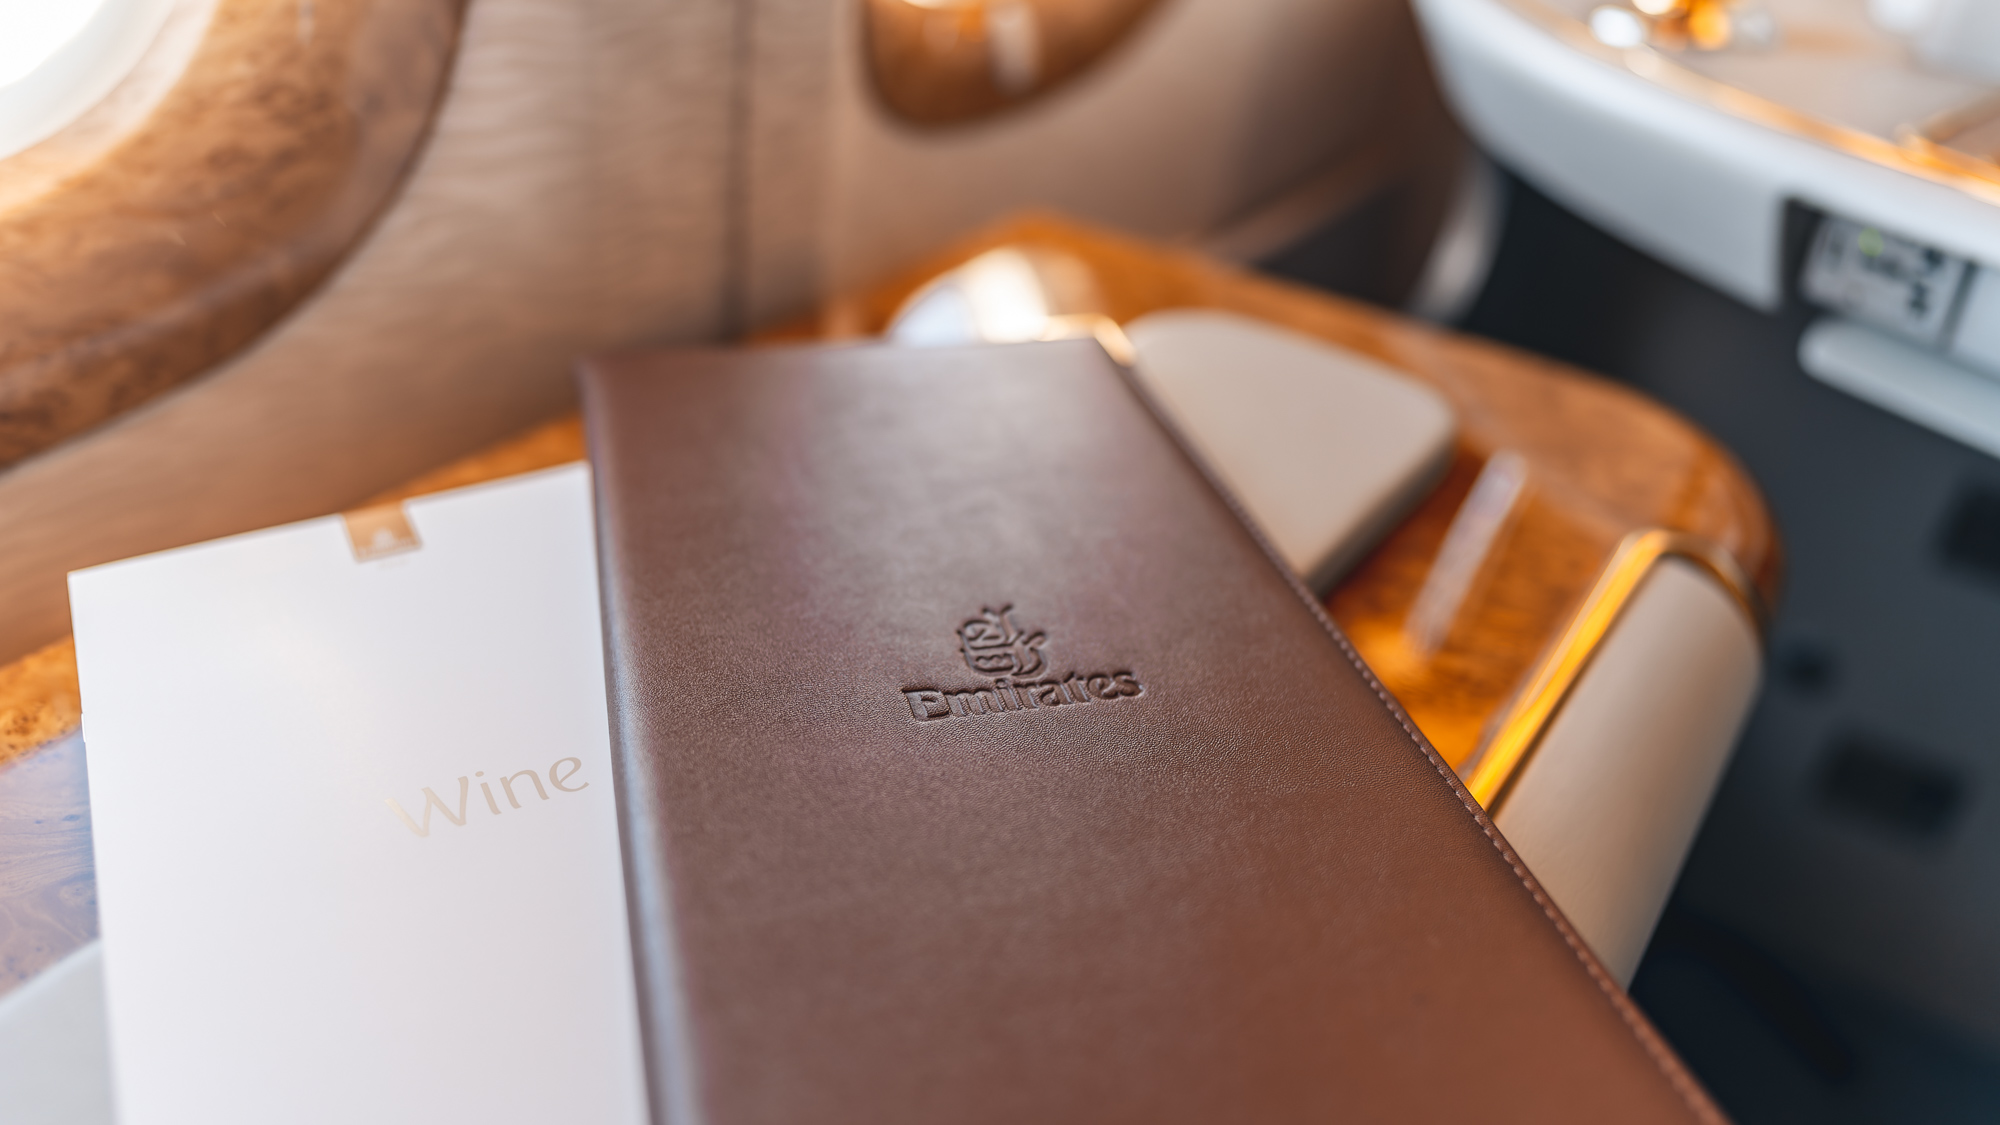 Emirates Boeing 777 First Class leather menu